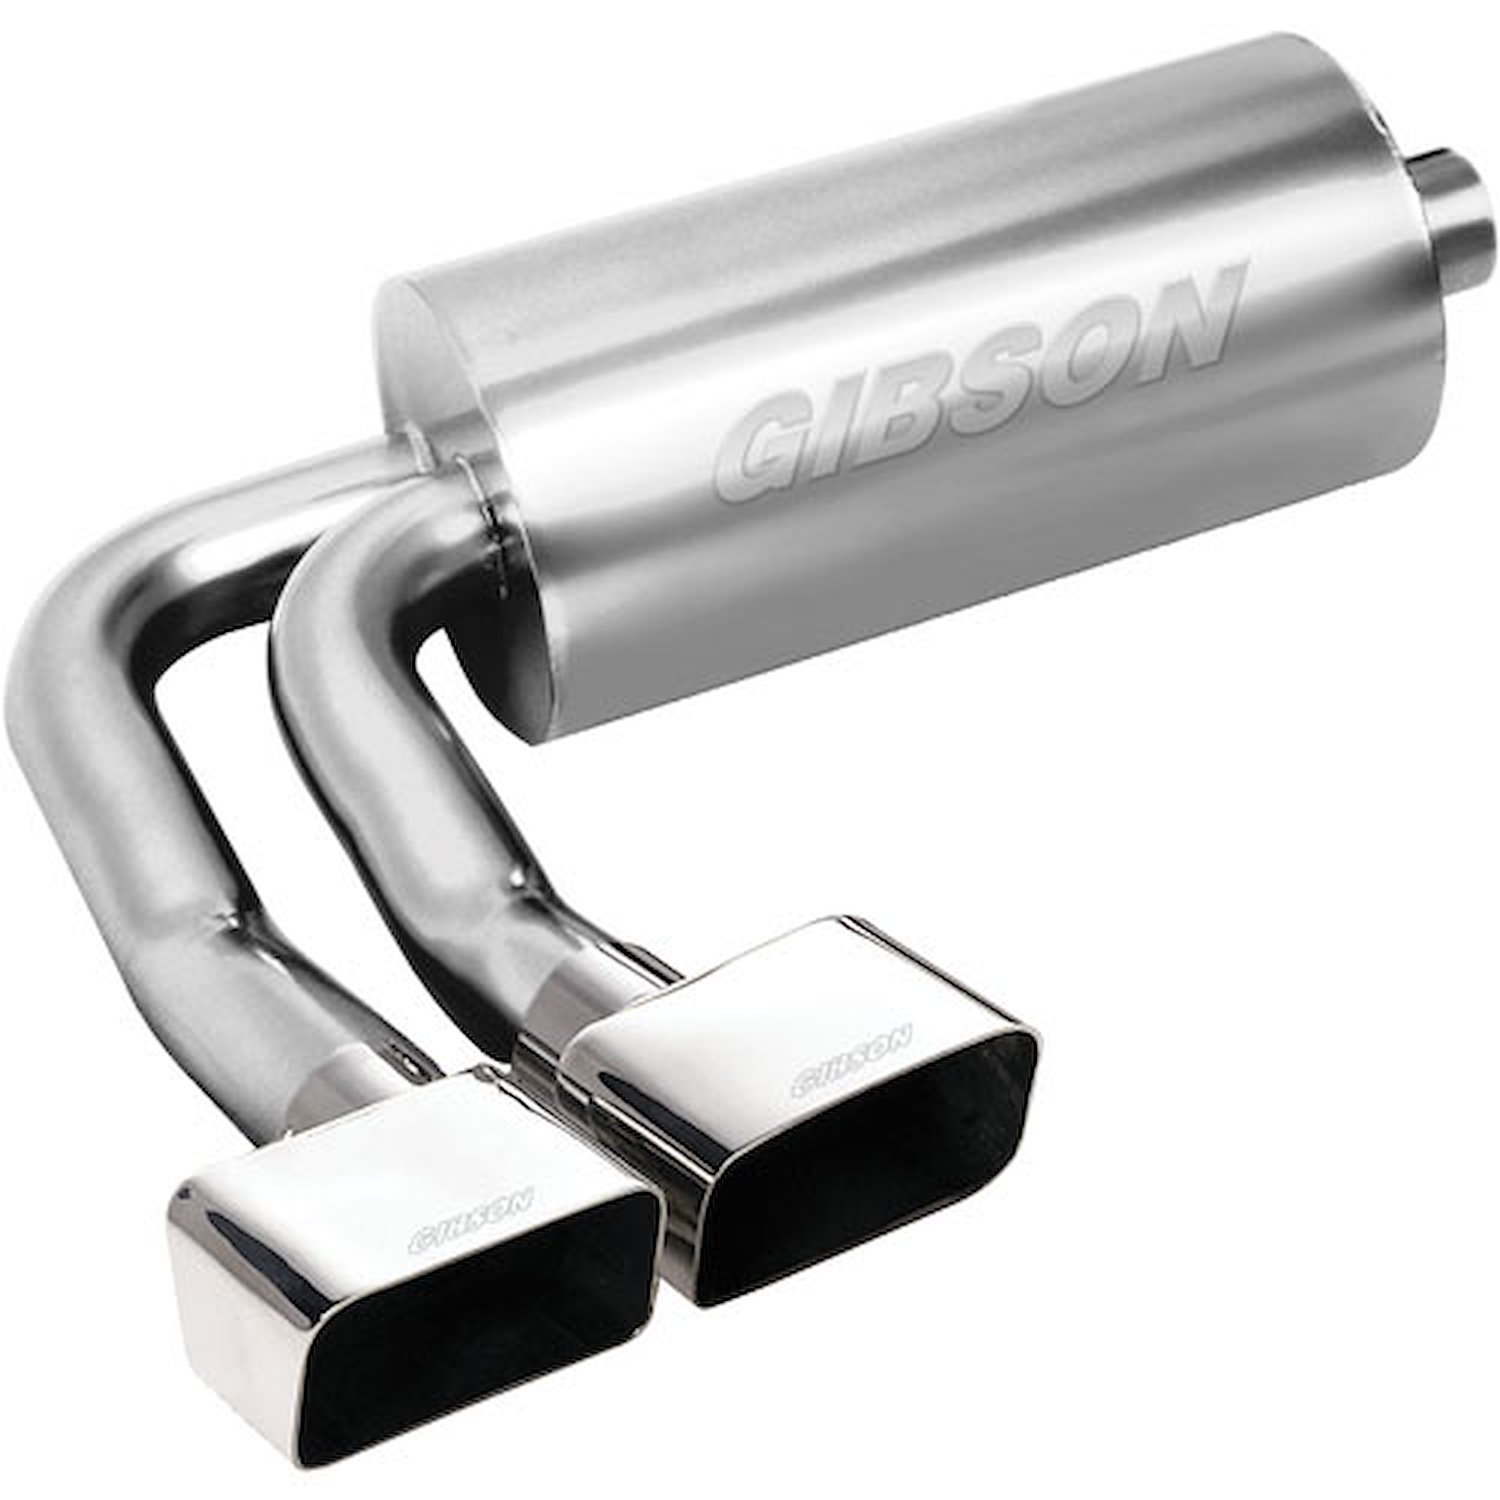 Super Truck Stainless Steel Cat-Back Exhaust 1999-2004 Ford F-250/F-350 Super Duty 5.4L/6.8L